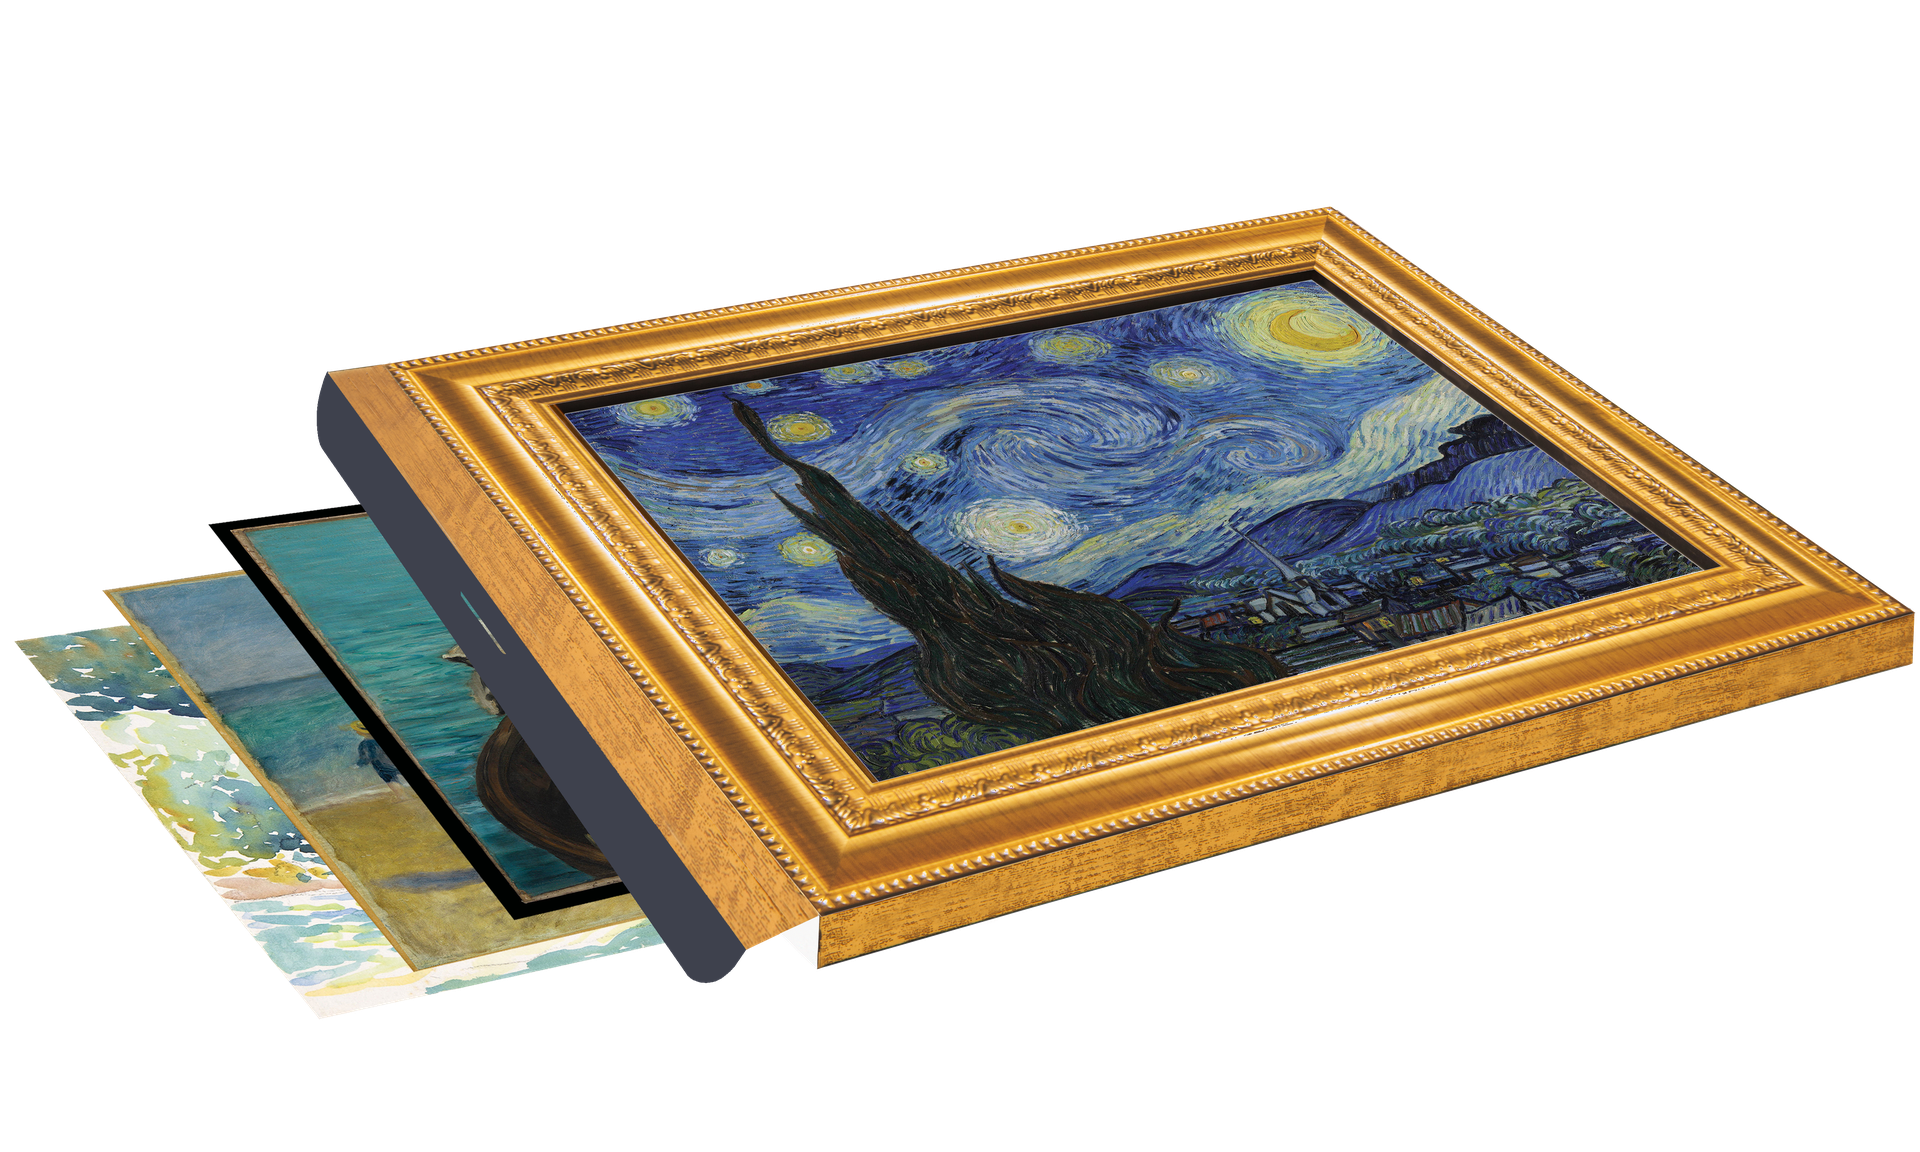 Diamond's dimensional picture frame encloses four (4) pieces of art and features side closures with locking tabs, allowing the recipient to change the artwork.